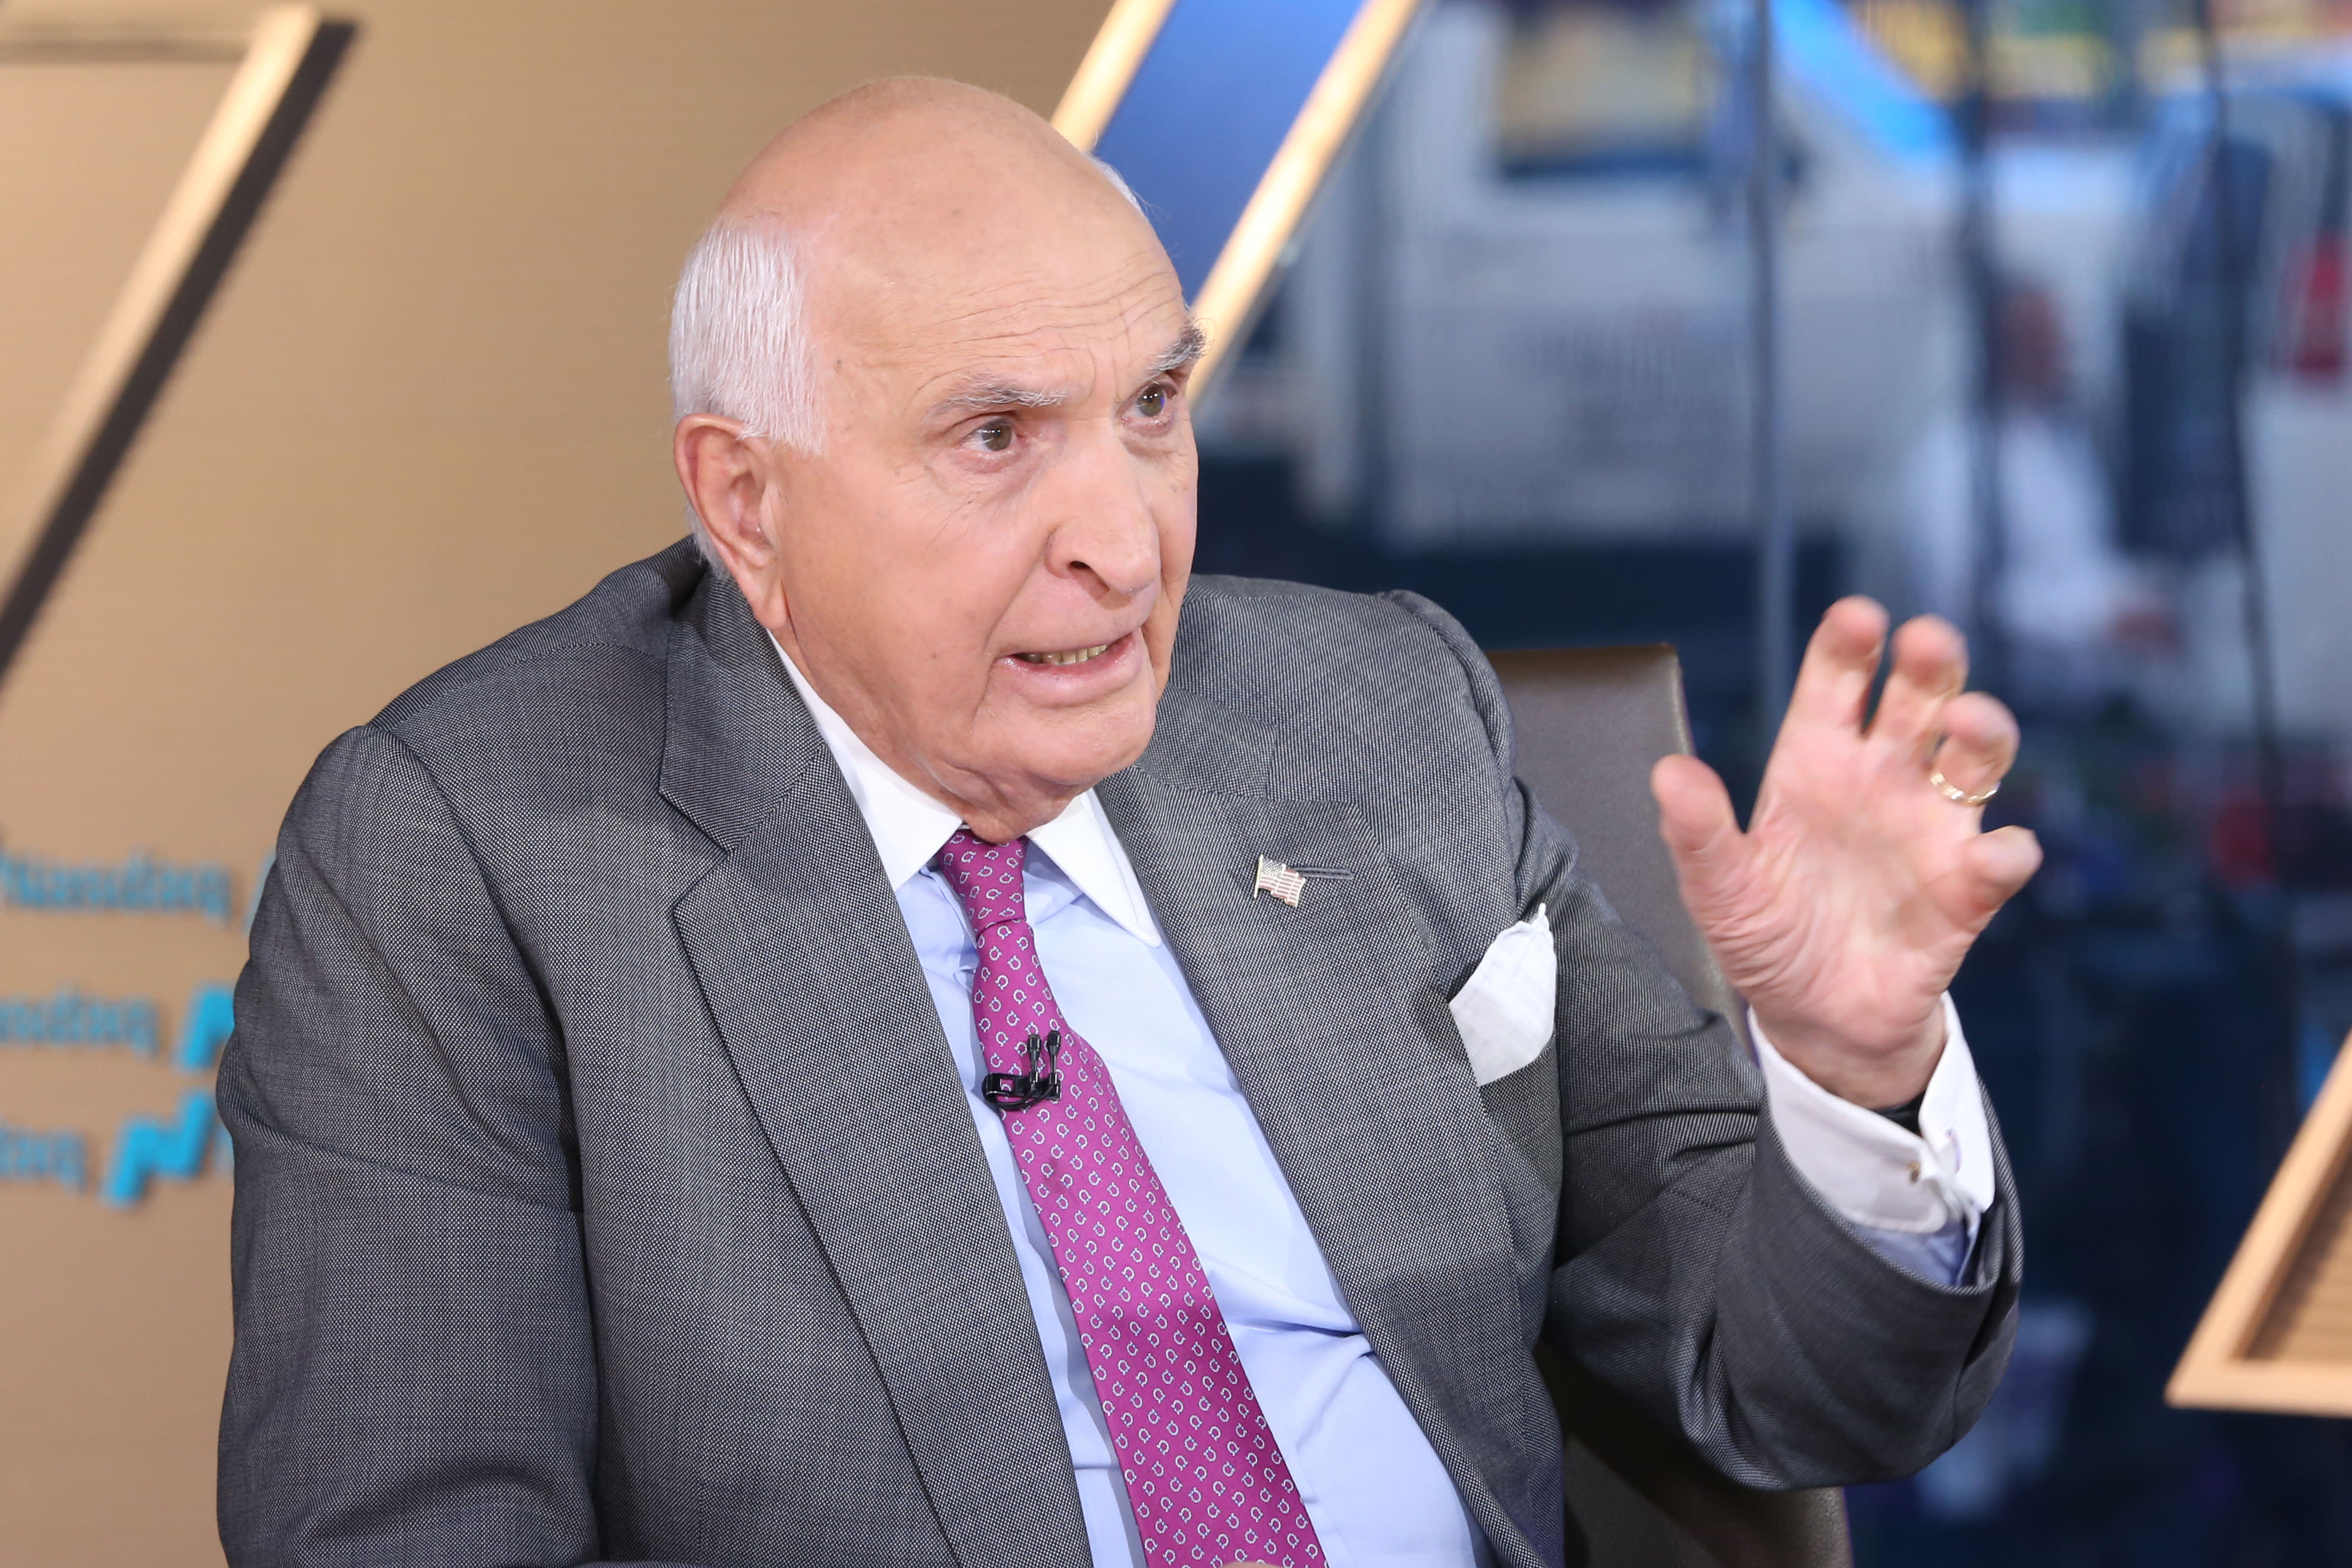 Ken Langone explodes Trump, outraged by the Capitol and promises to support Joe Biden